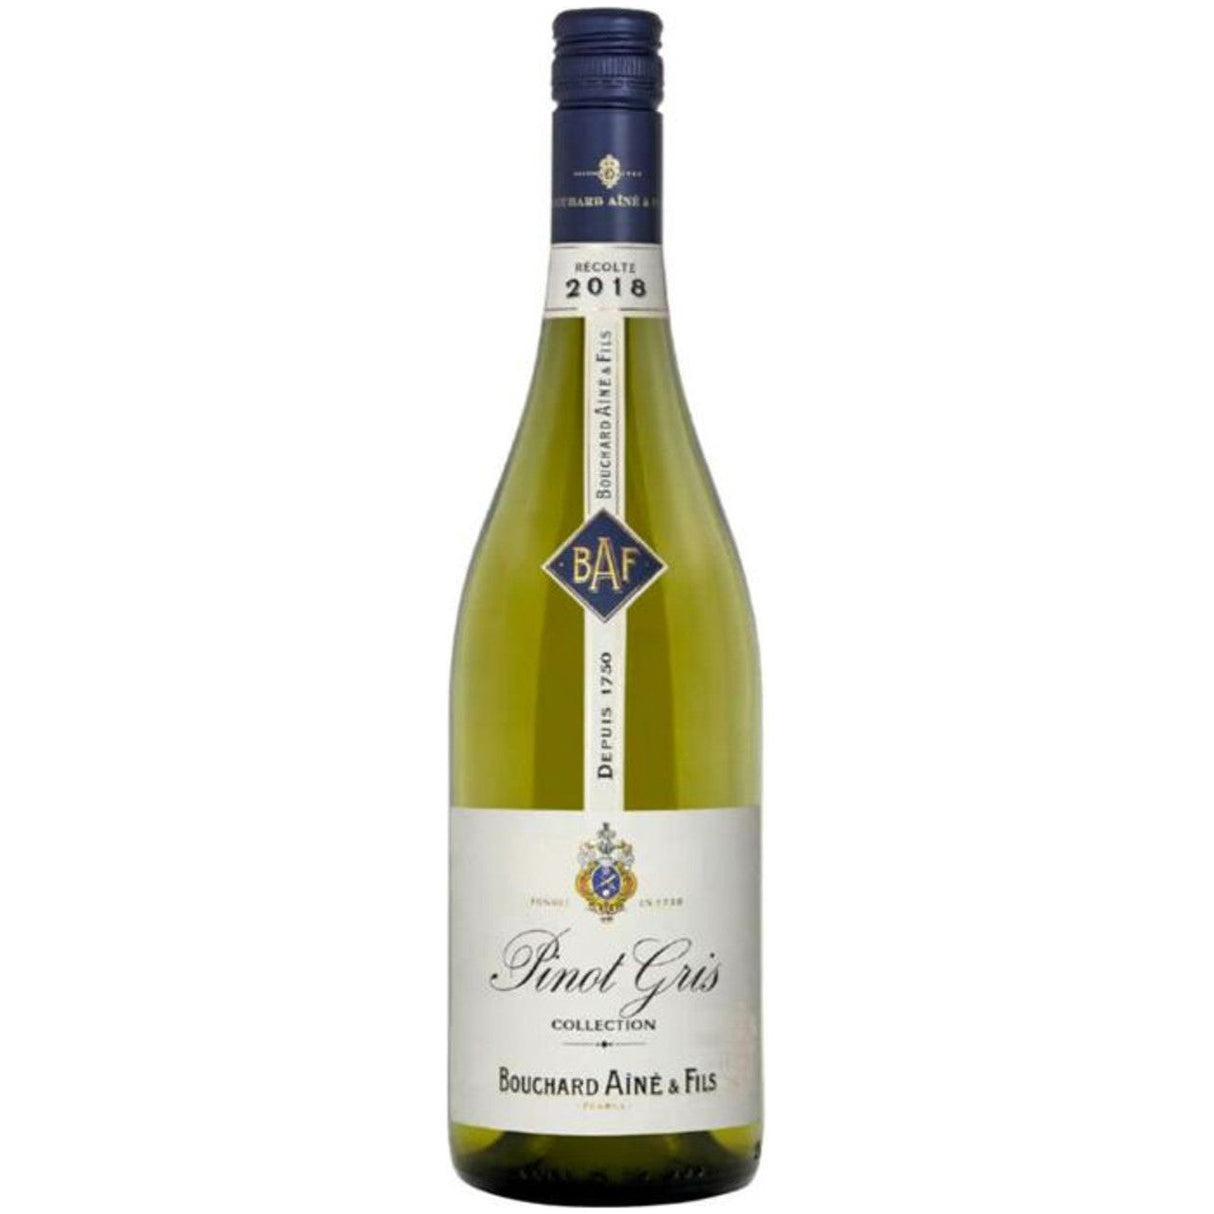 BOUCHARD AINE & FILS Collection Pinot Gris 2021 (12 Bottles)